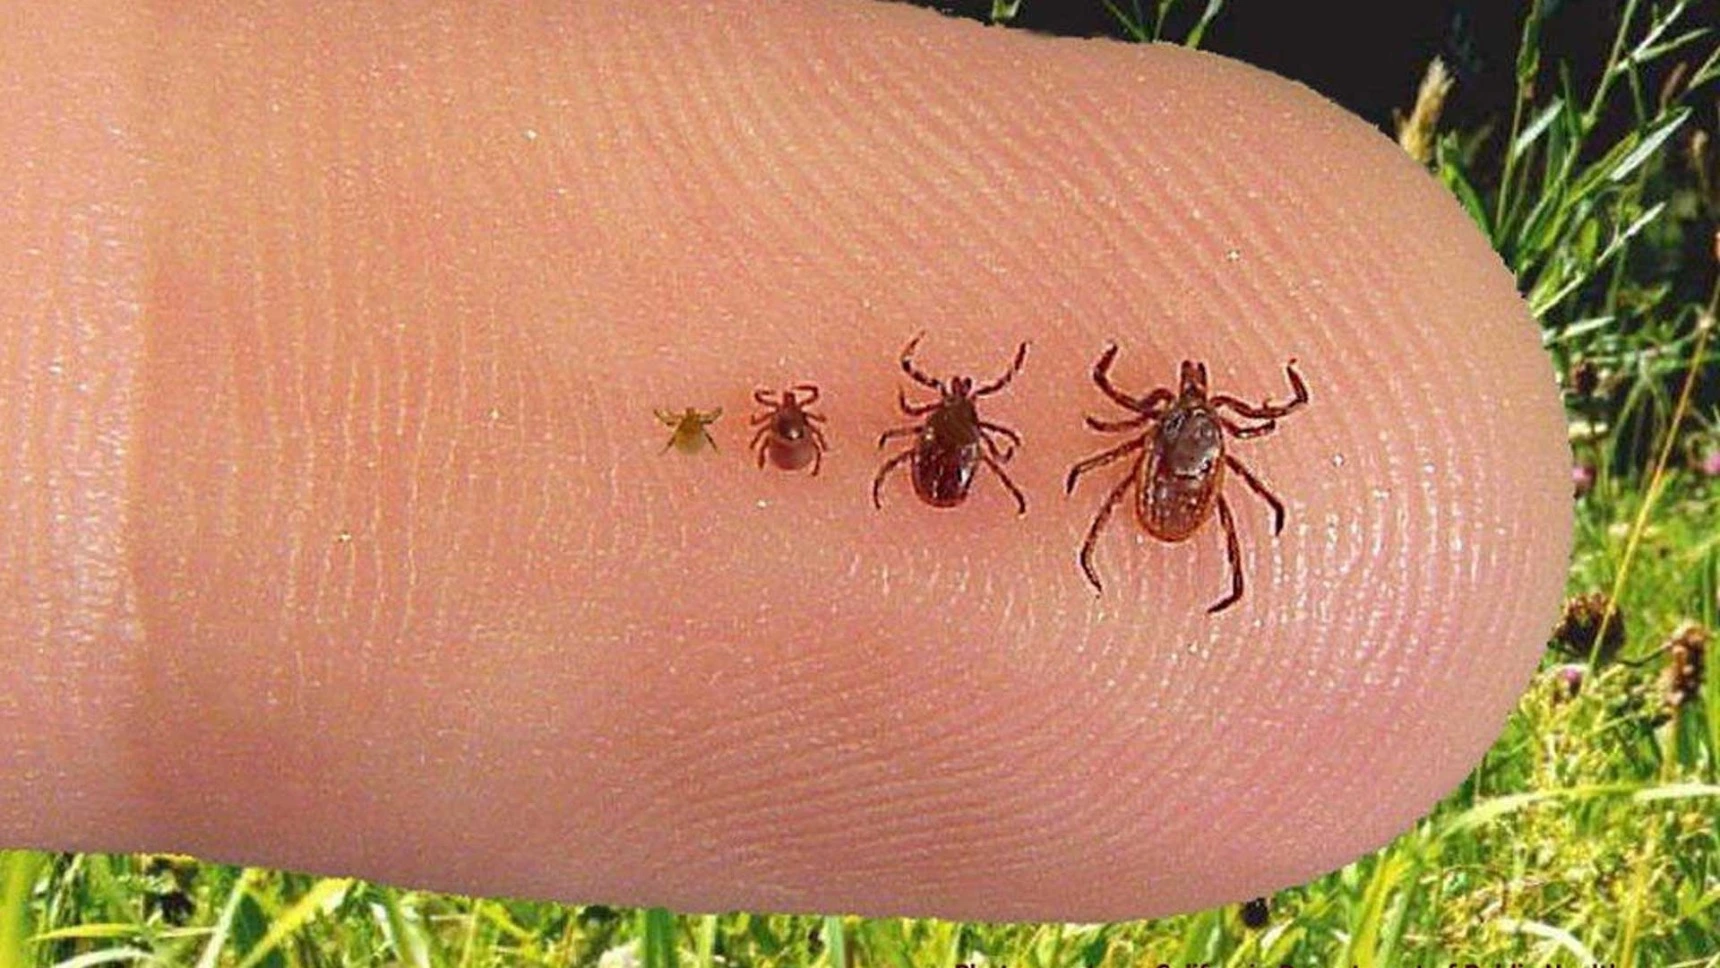 Ticks in the lawns of our customer in Summit, NJ.